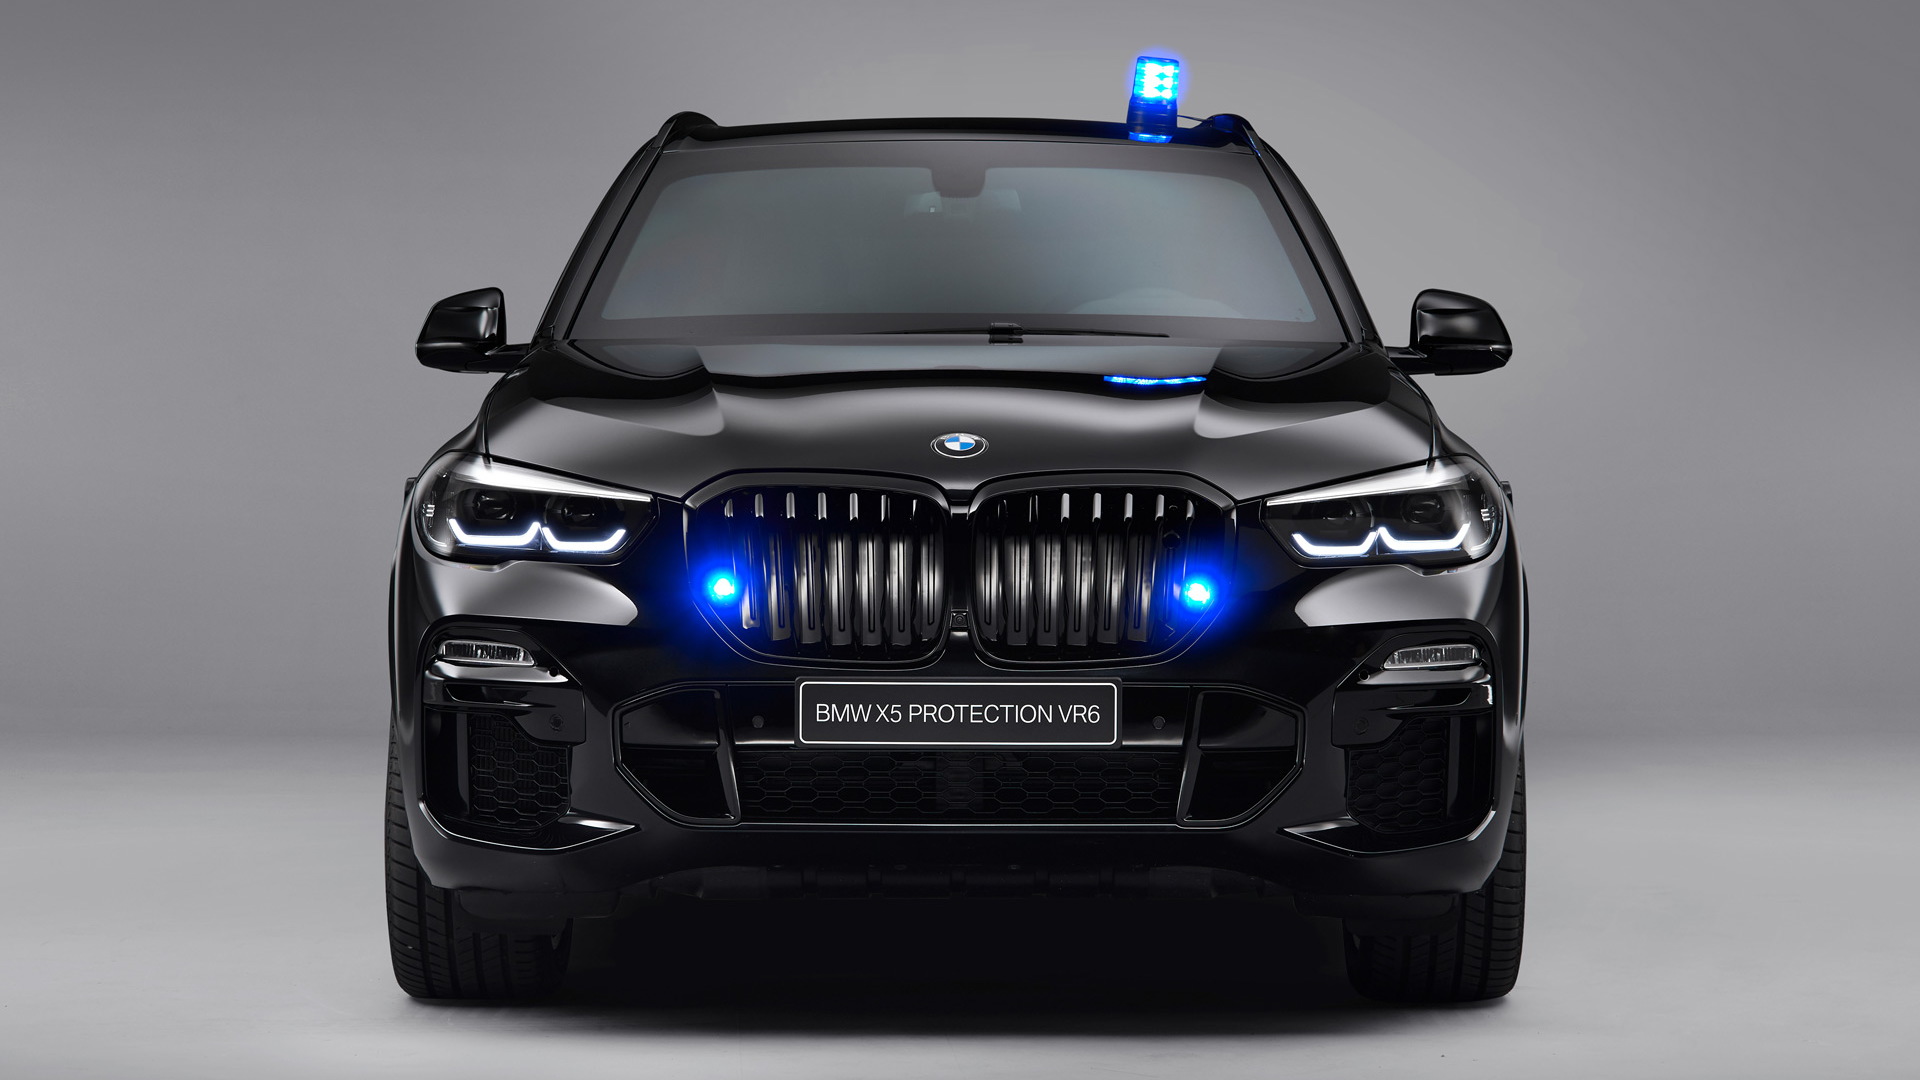 2020 BMW X5 Protection VR6